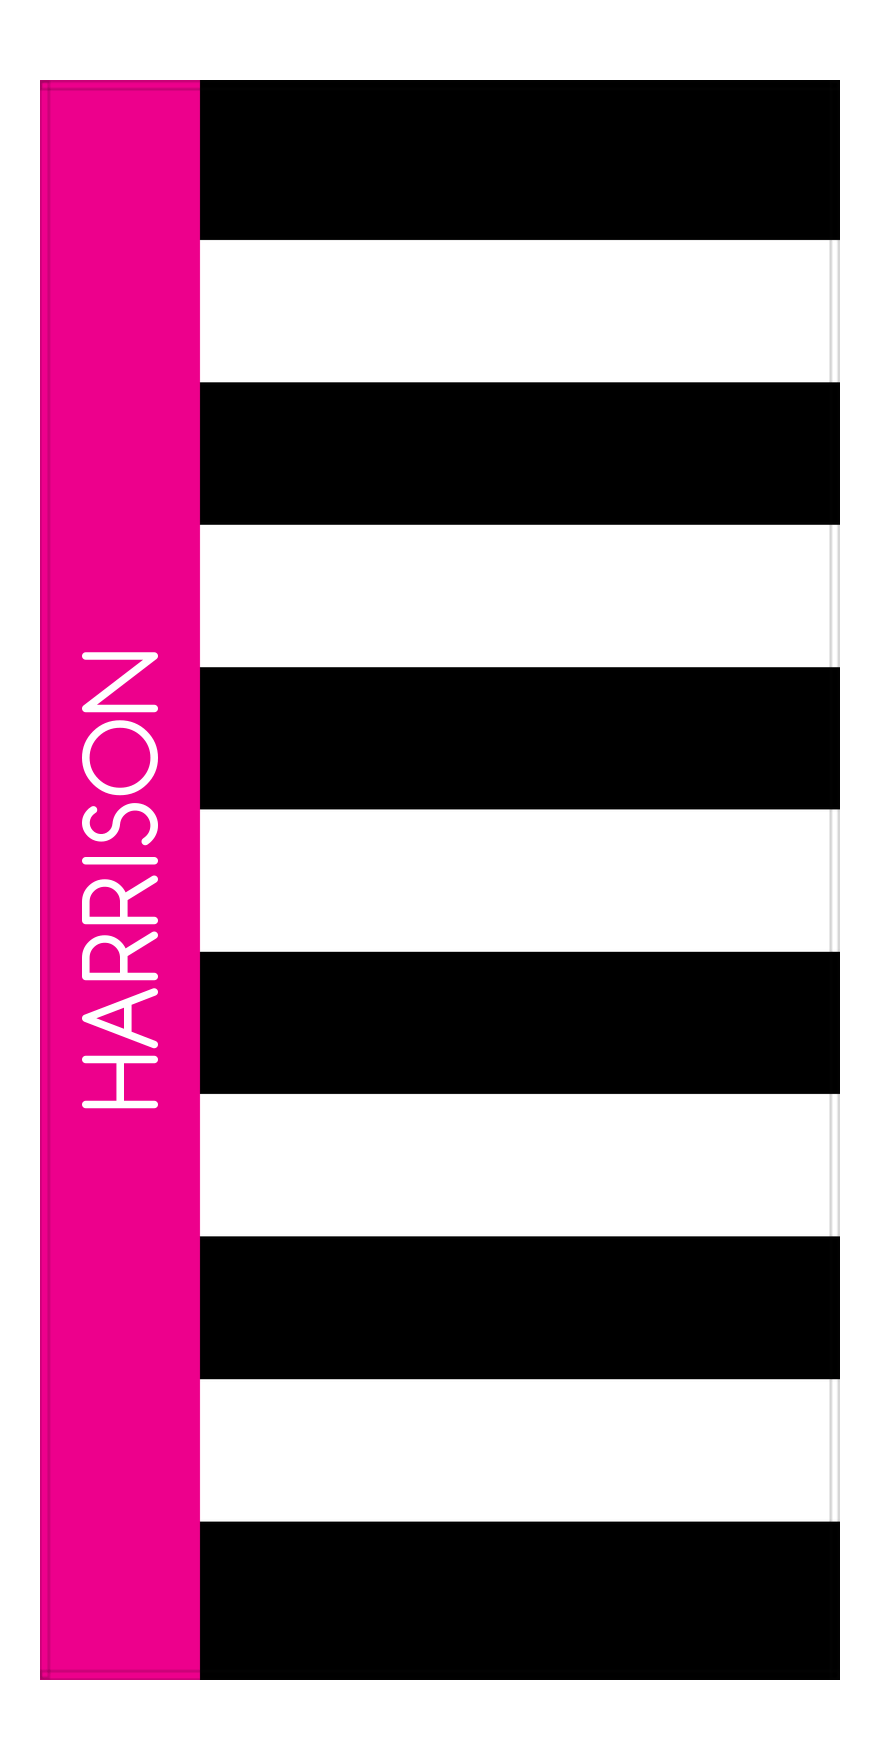 Personalized Rugby Stripes Beach Towel V - Black, White, and Pink - Front View